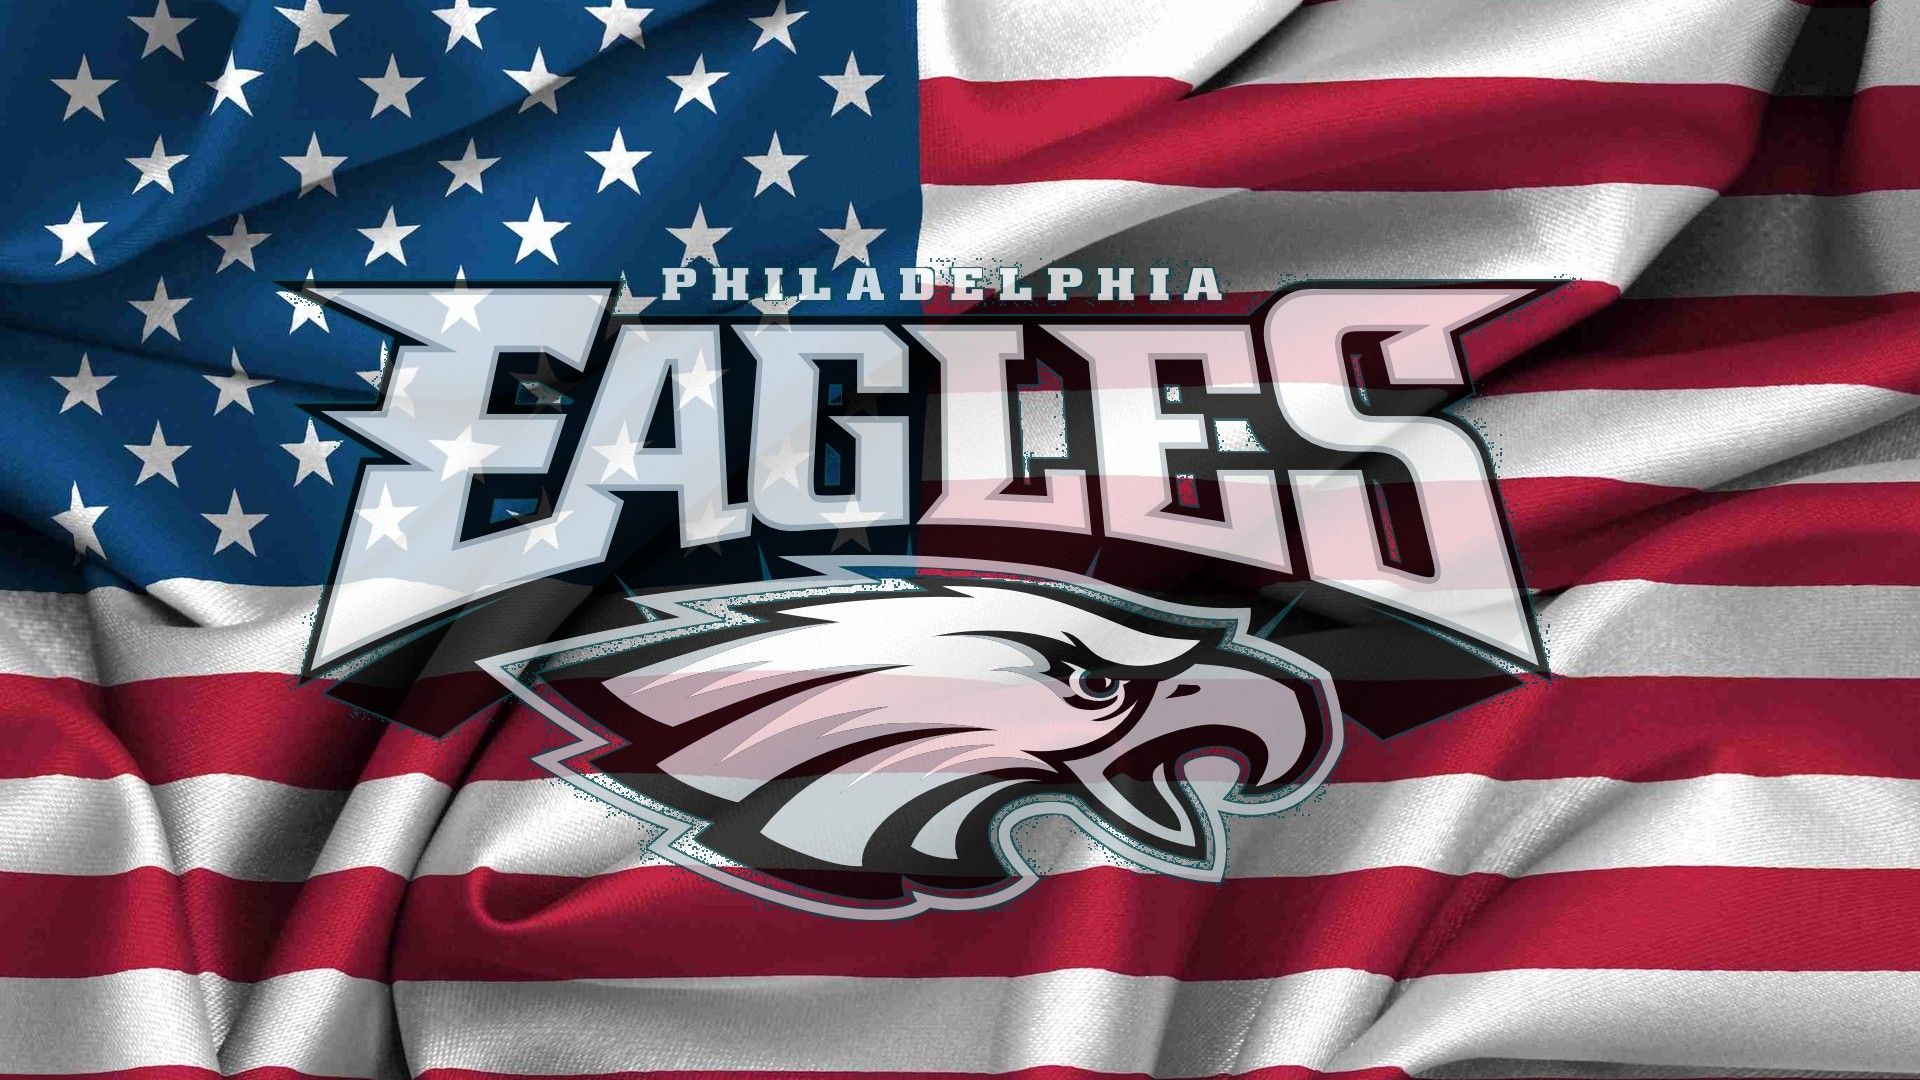 Philadelphia Eagles Logo HD Wallpaper Picture To Like Or Share